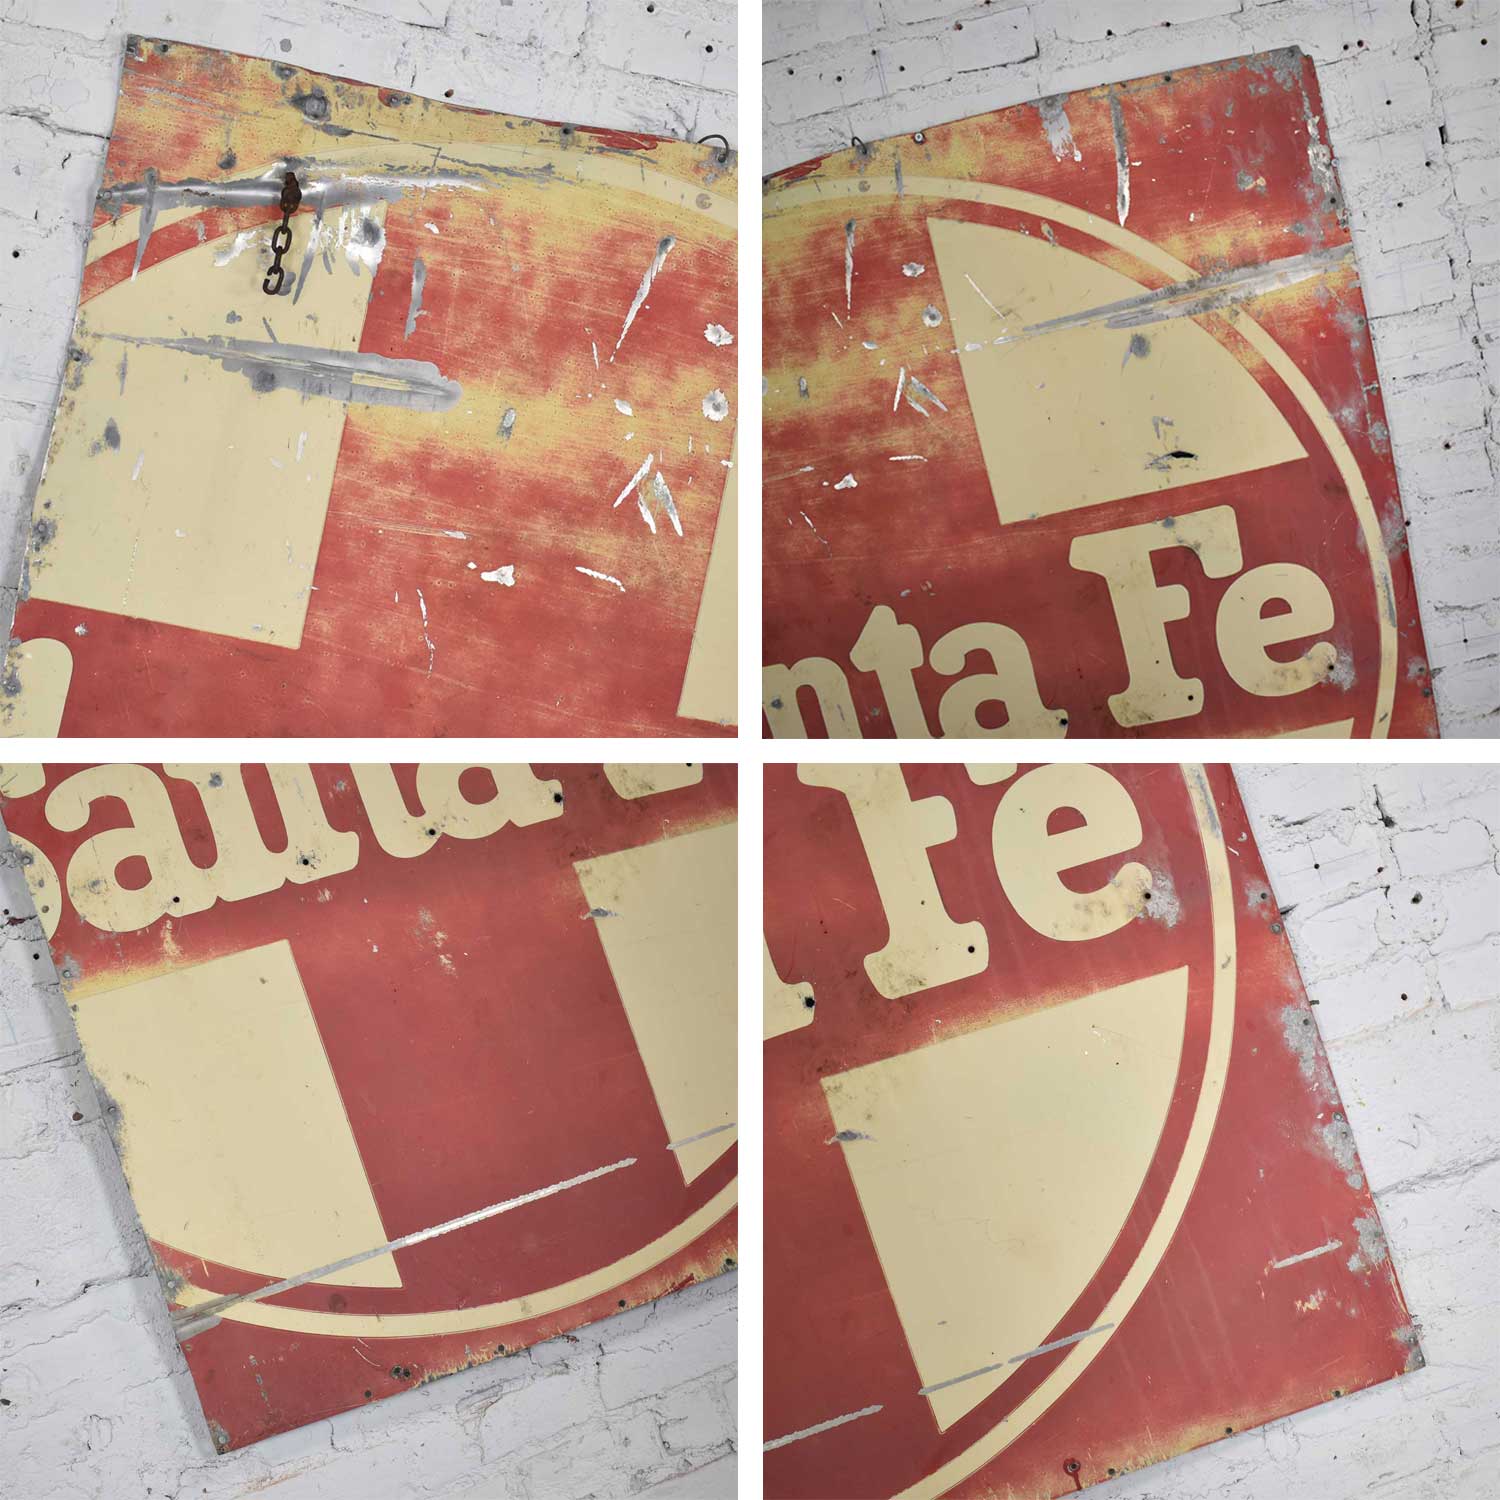 Vintage Primitive Rustic Extra-Large Santa Fe Railroad Red & White Painted Metal Sign